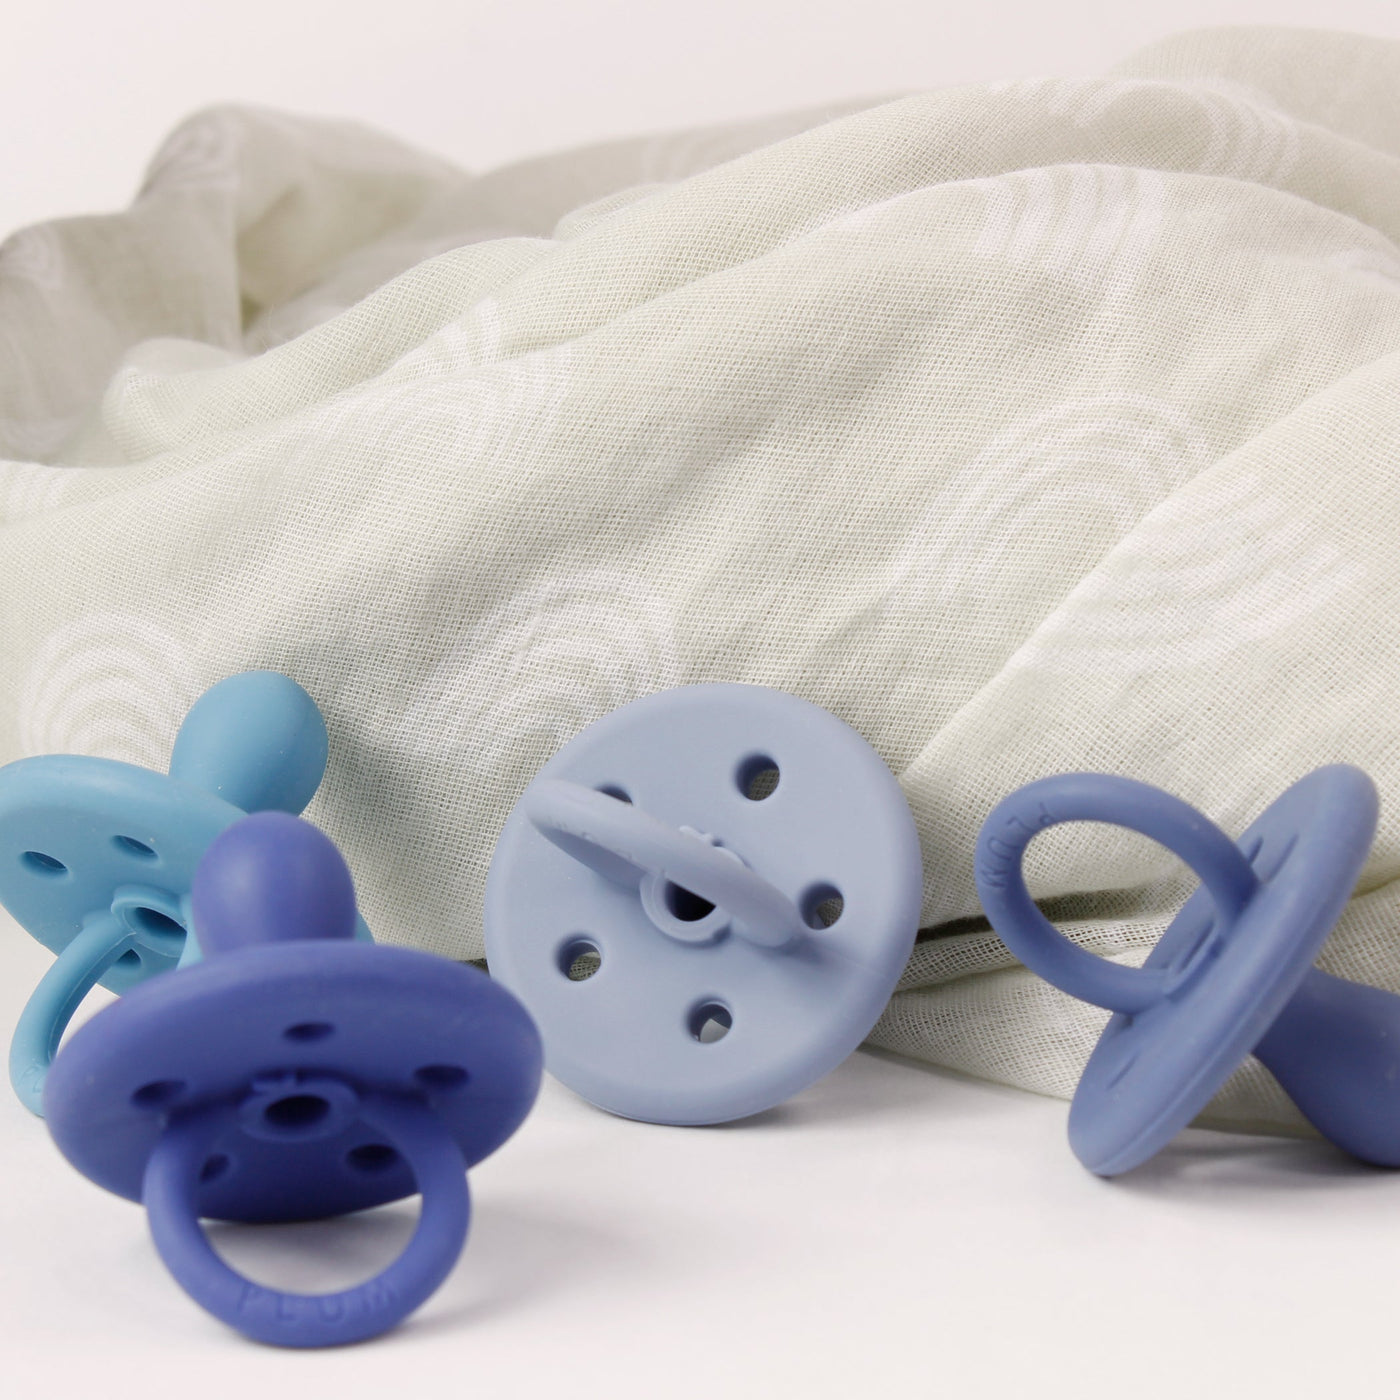 4 Silicone Soothers colour bundle - Breezy Blues